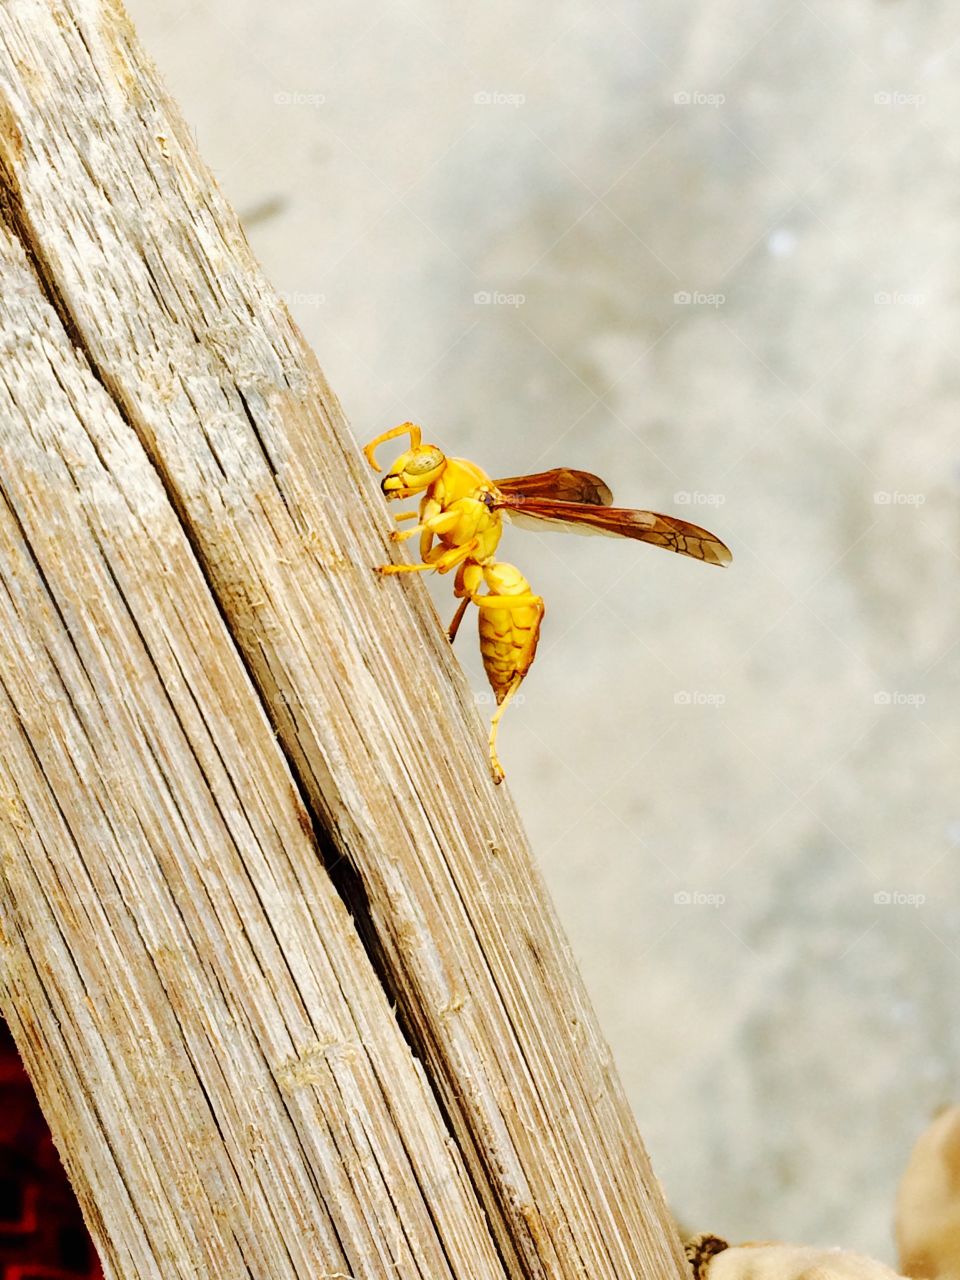 Golden bee on bamboo